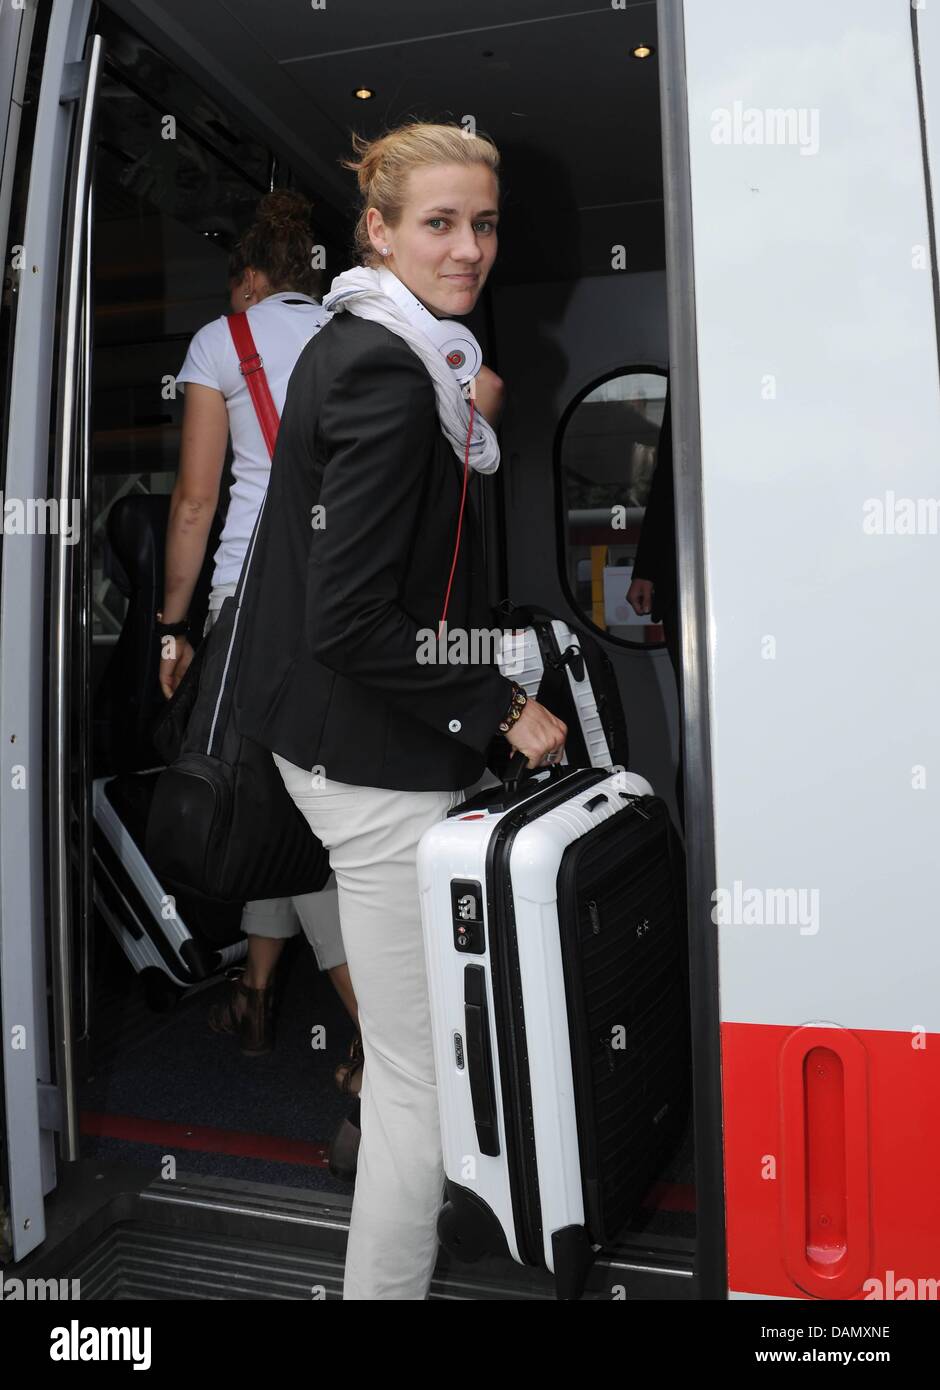 German women's national soccer player Simone Laudehr enters the ICE train from Frankfurt to Duesseldorf at the station in Frankfurt am Main, Germany, 01 July 2011. Germany's next FIFA Women's World Cup match will take place in Moenchengladbach on 5 July 2011. Photo: Markus Gilliar/GES-Sportfoto/DFB Stock Photo